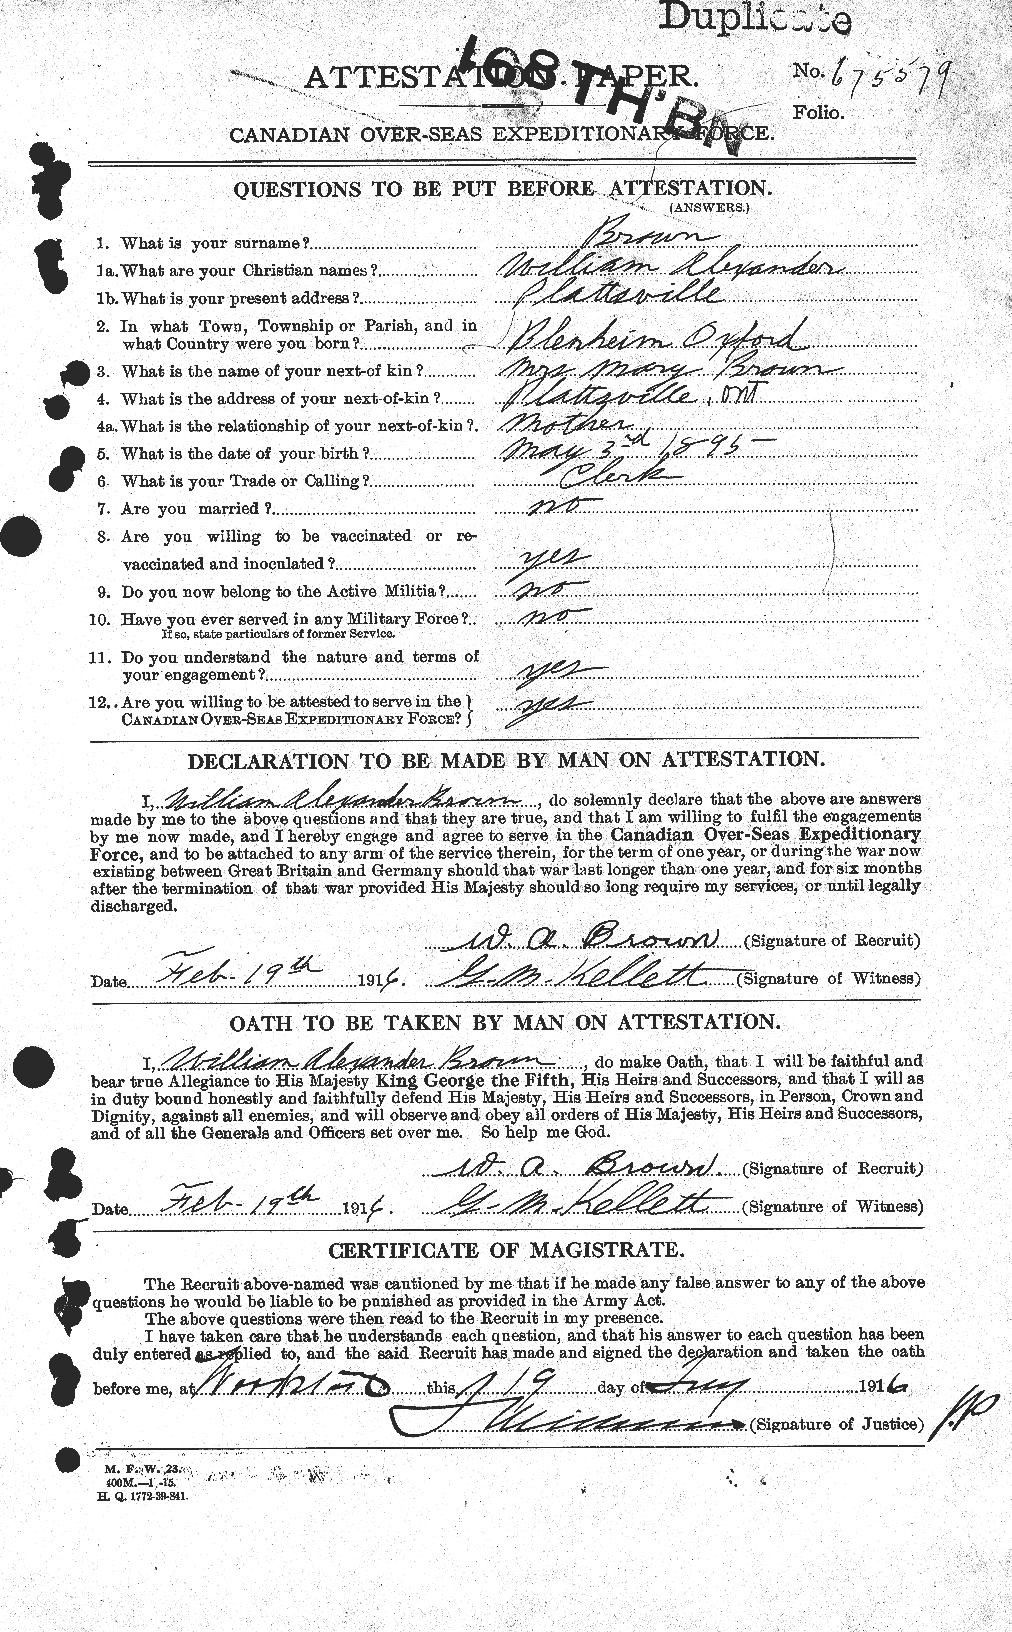 Personnel Records of the First World War - CEF 268213a